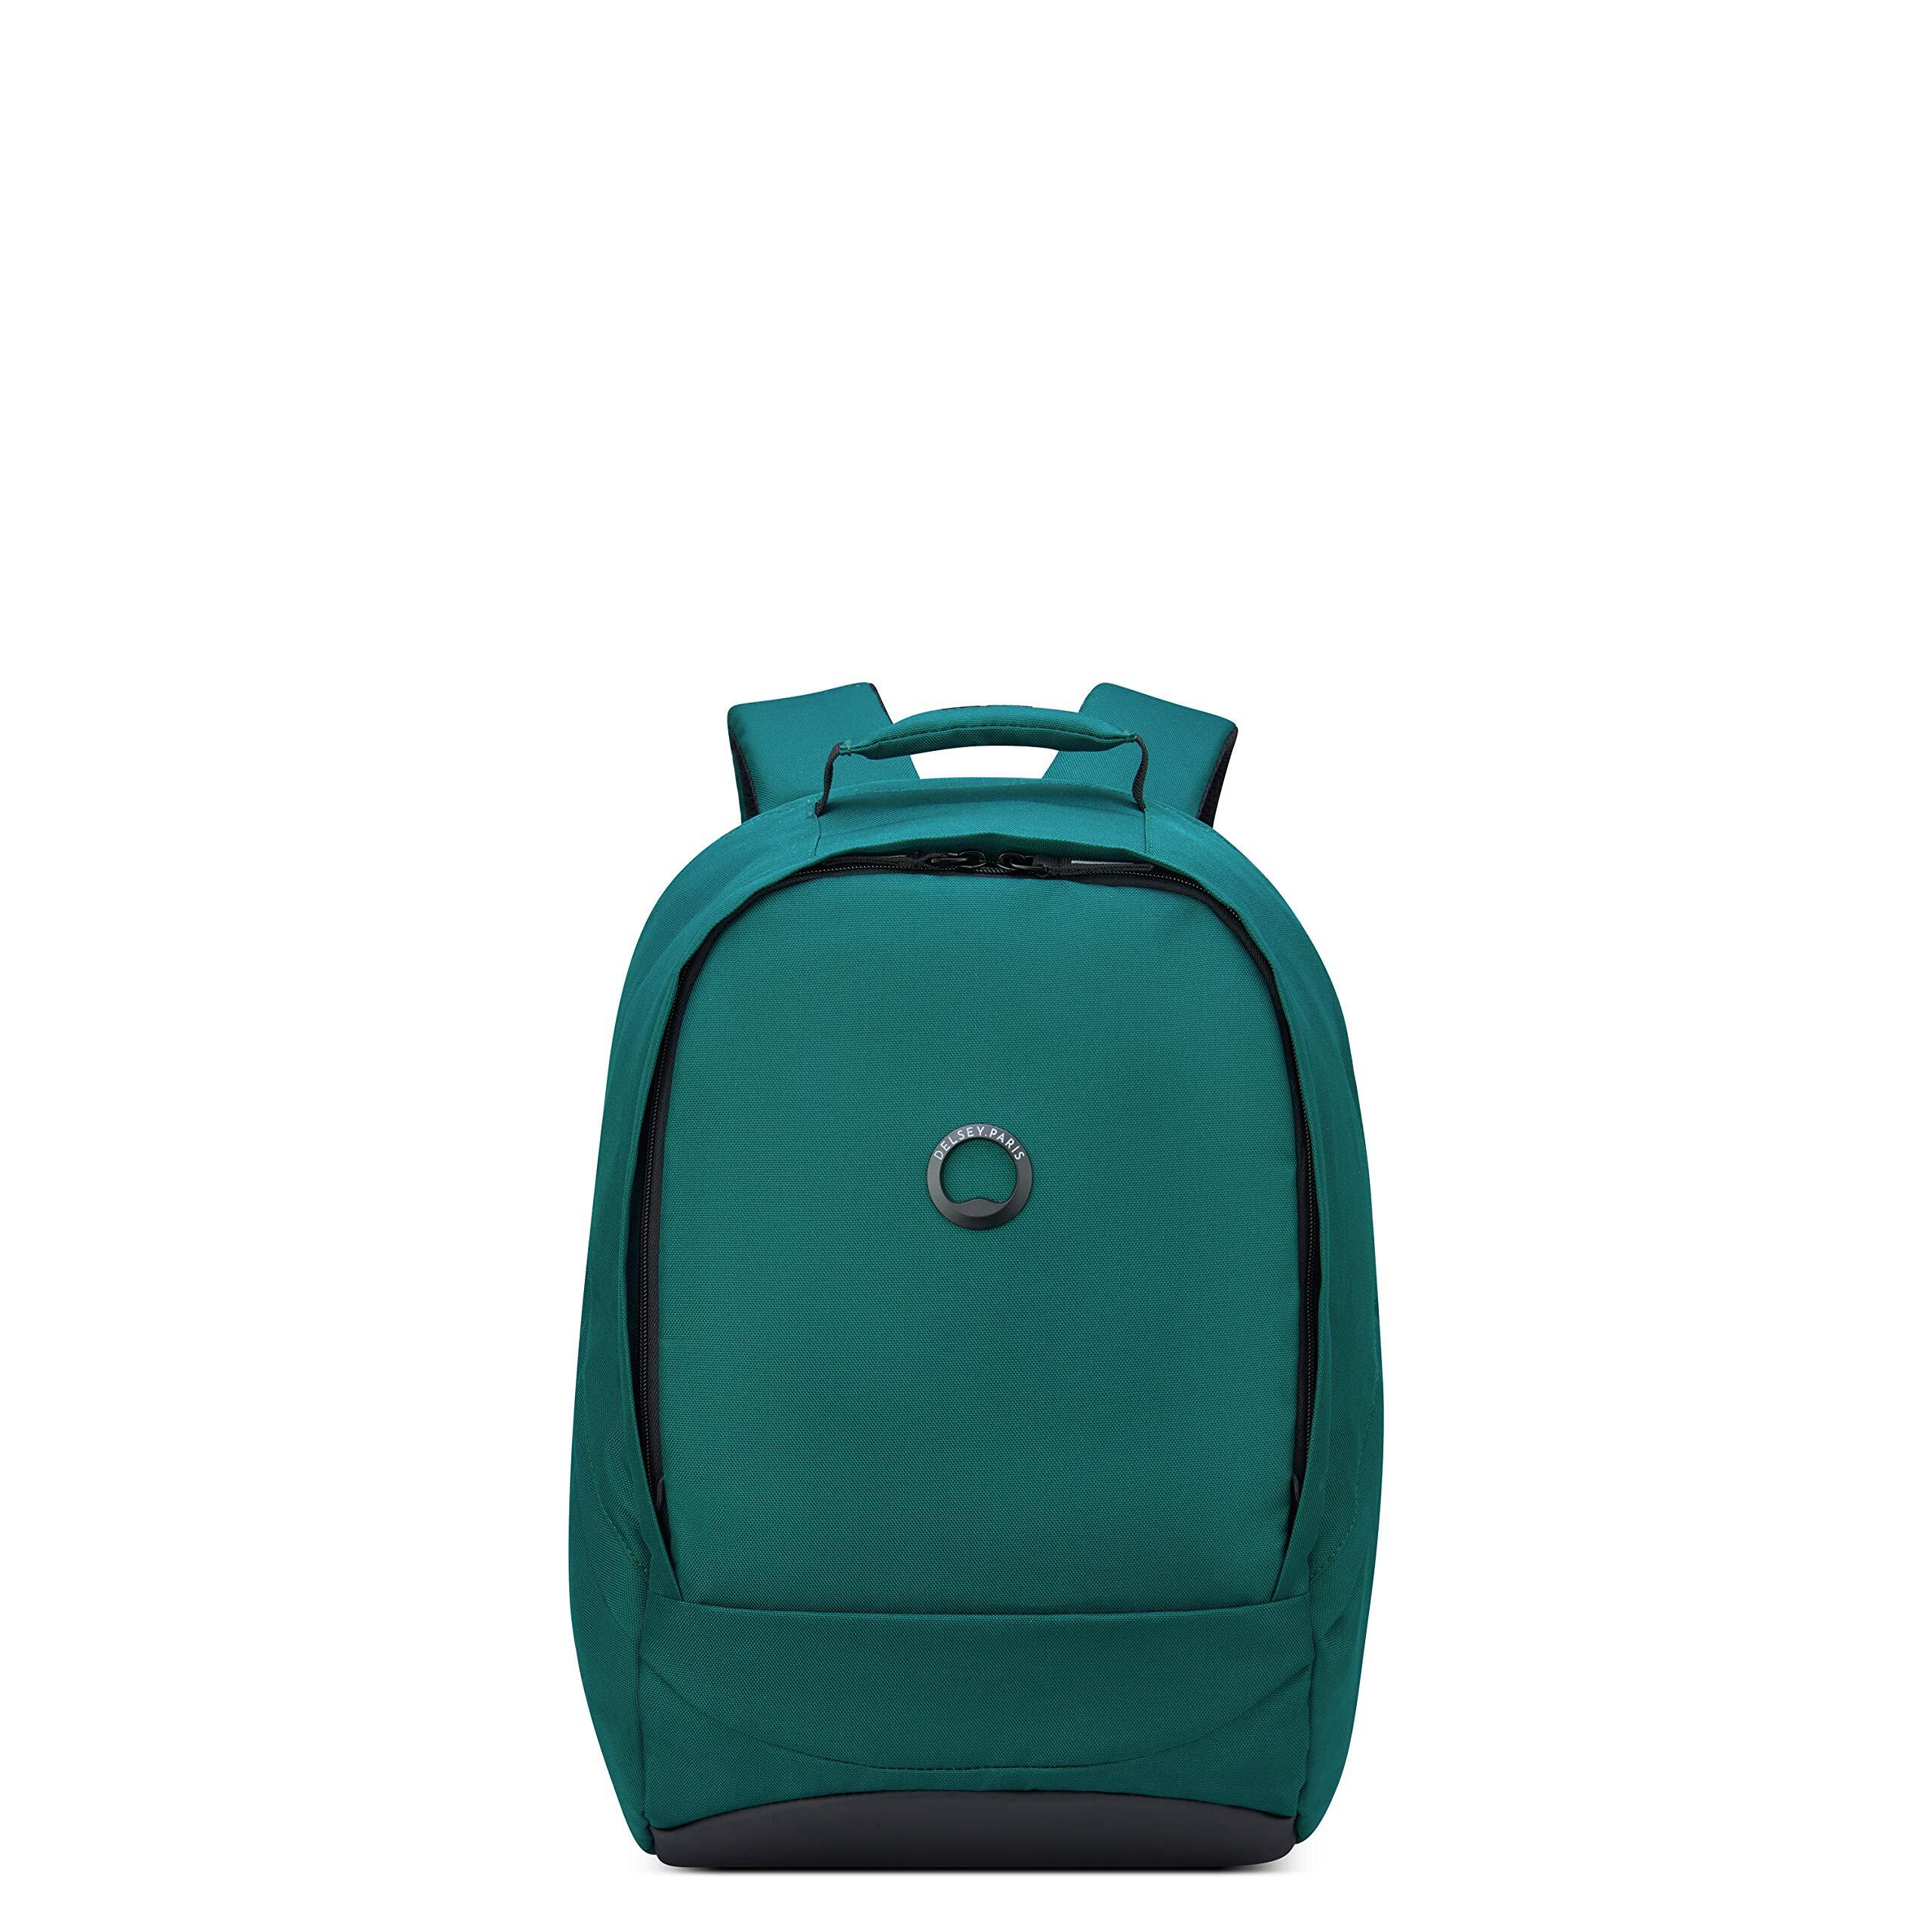 DELSEY Securban Laptop Backpack - Anti Diefstal - 1 Compartment - 13,3 inch - Green